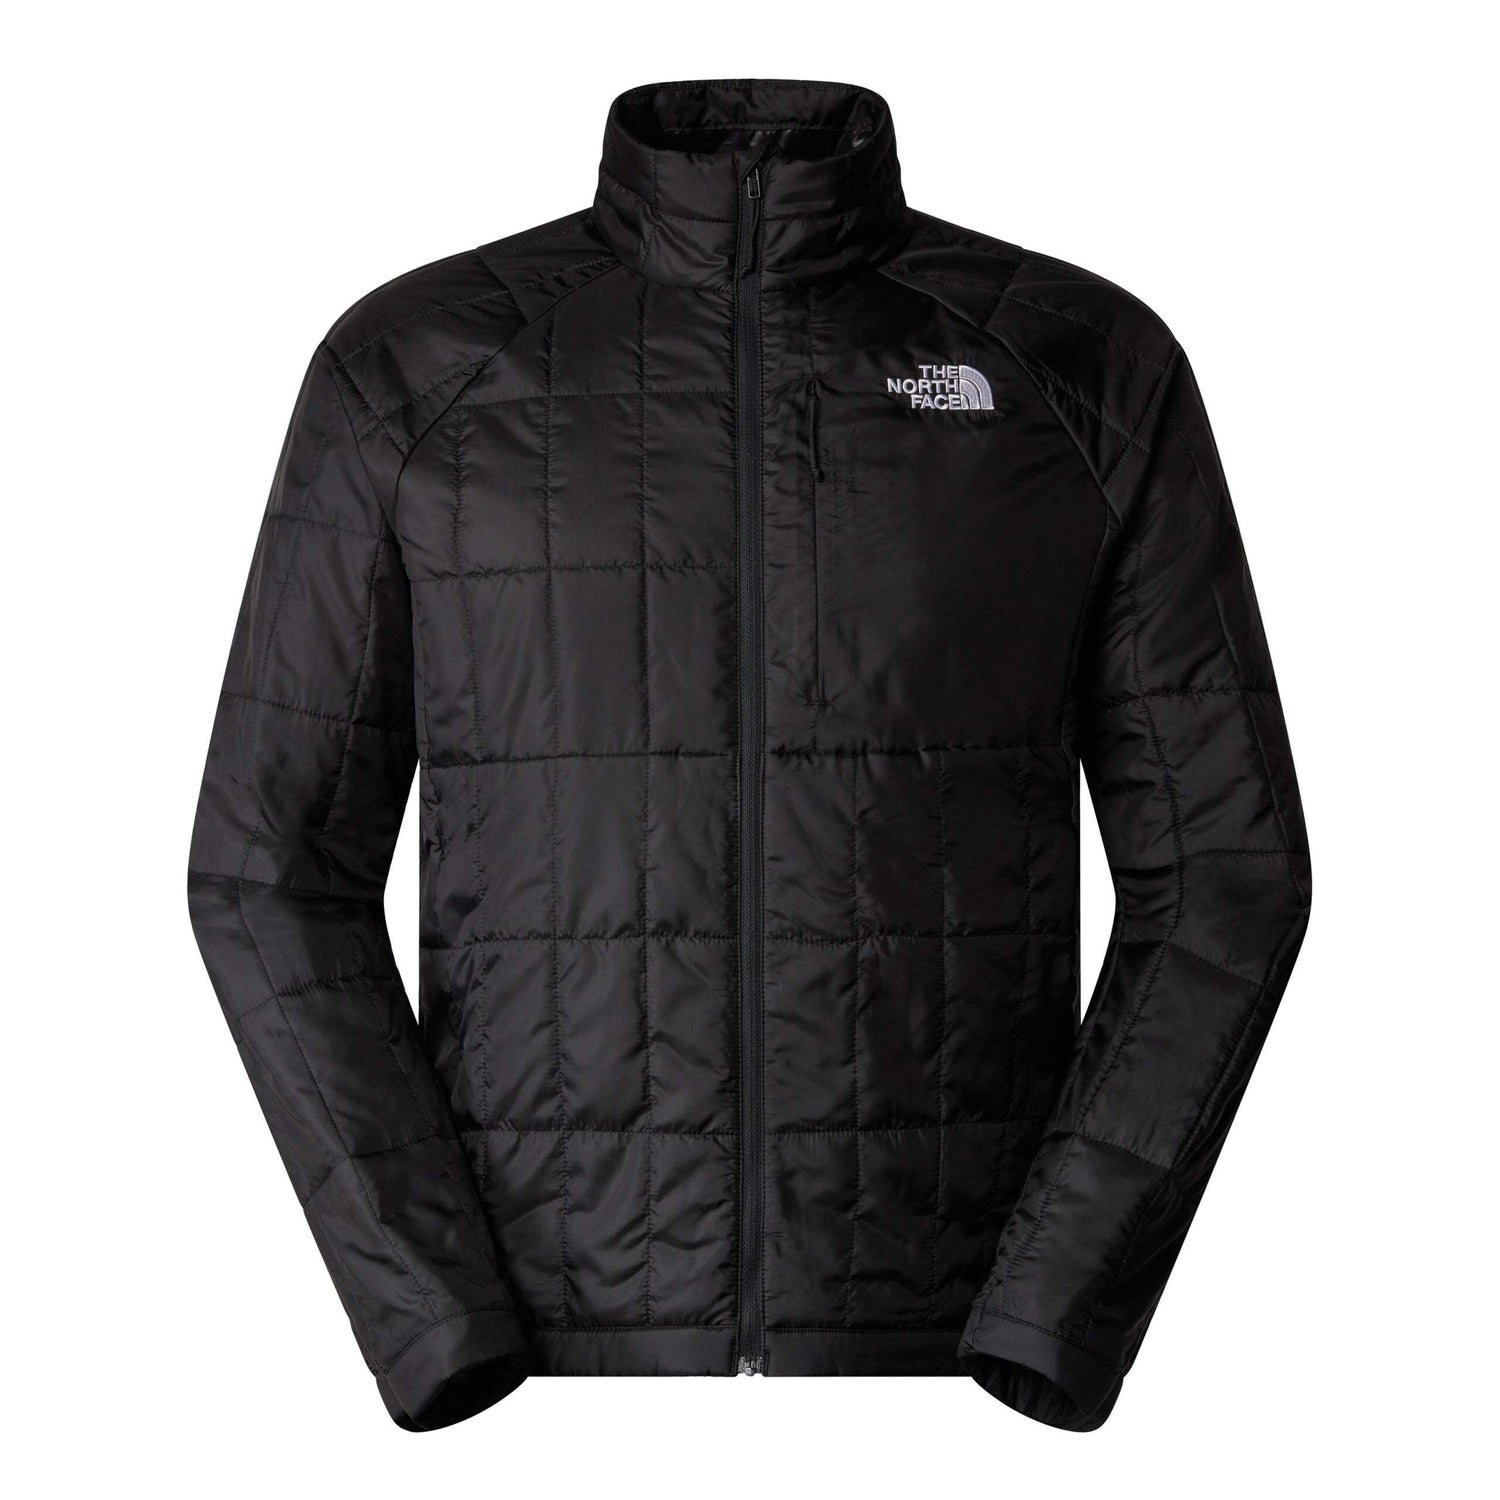 The North Face Promotional Gifts